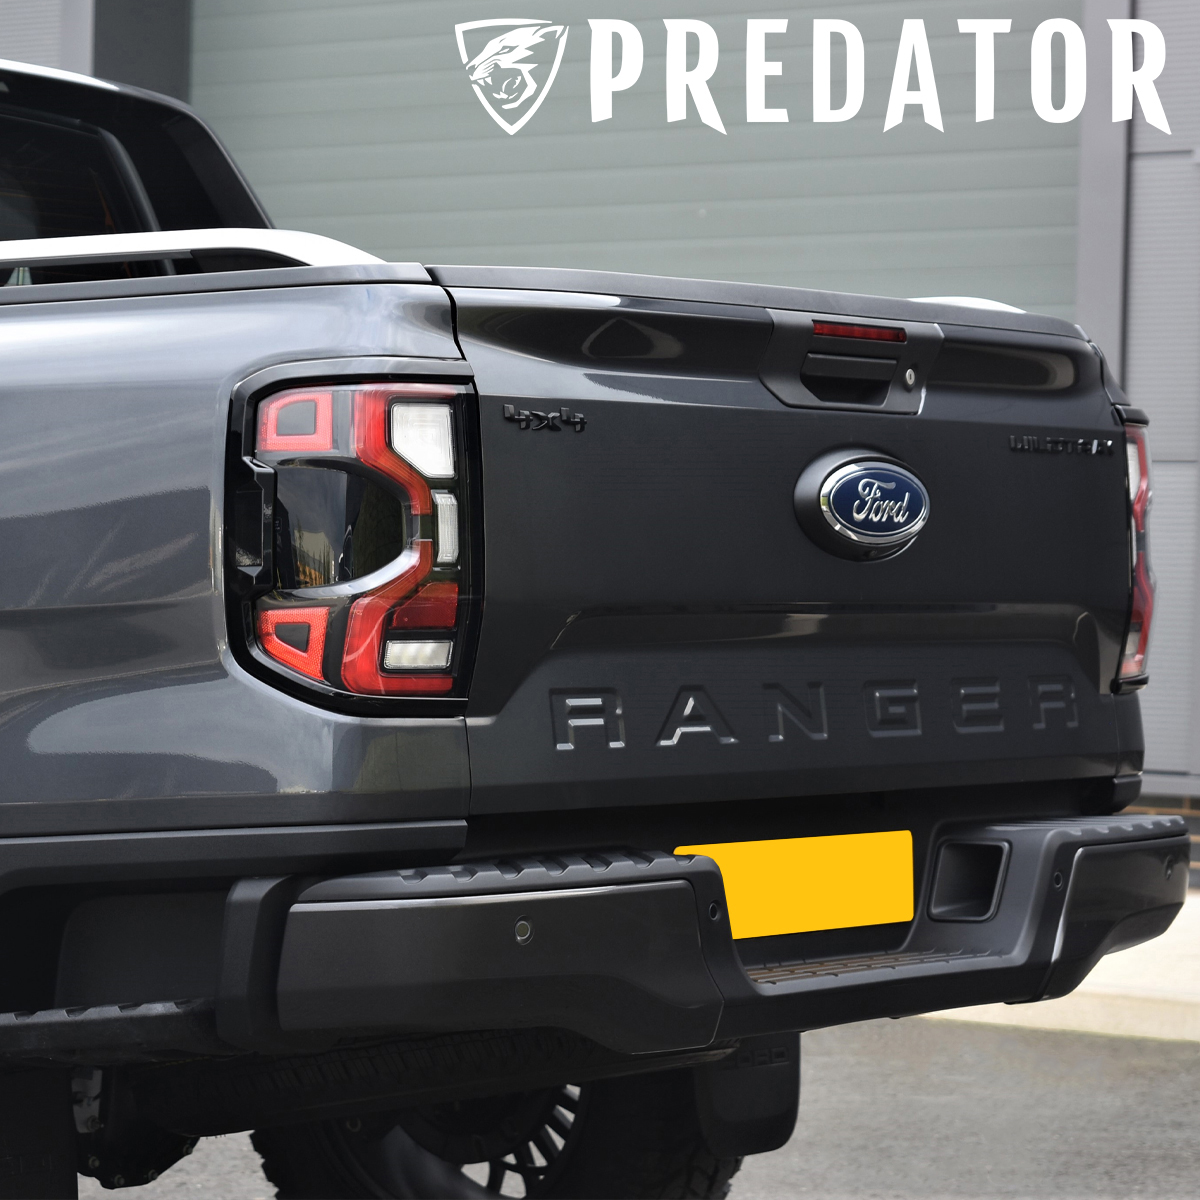 New Accessories Available for the 2023 Ford Ranger at 4x4AT!